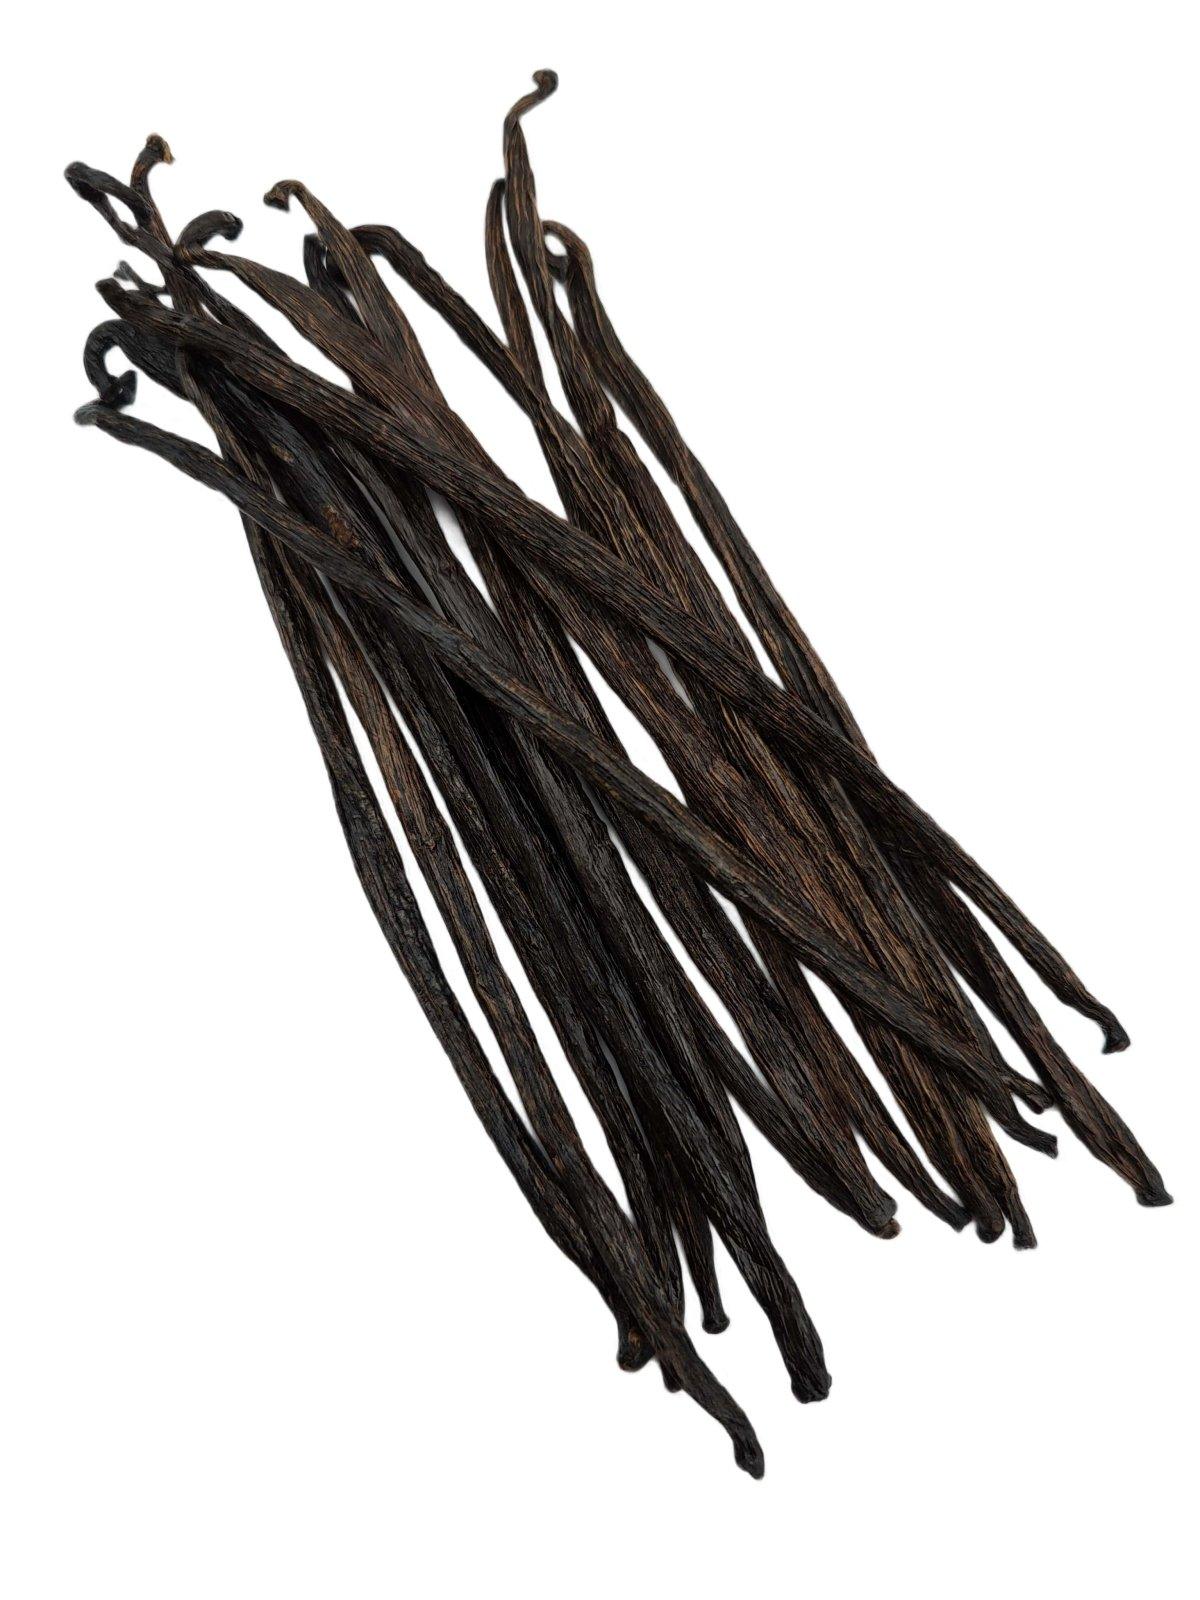 Indonesian Vanilla Beans Planifolia Extract Grade-B <br>For Extract Making<BR>5 count, 15 count, 25 count, 50 count, 100 count